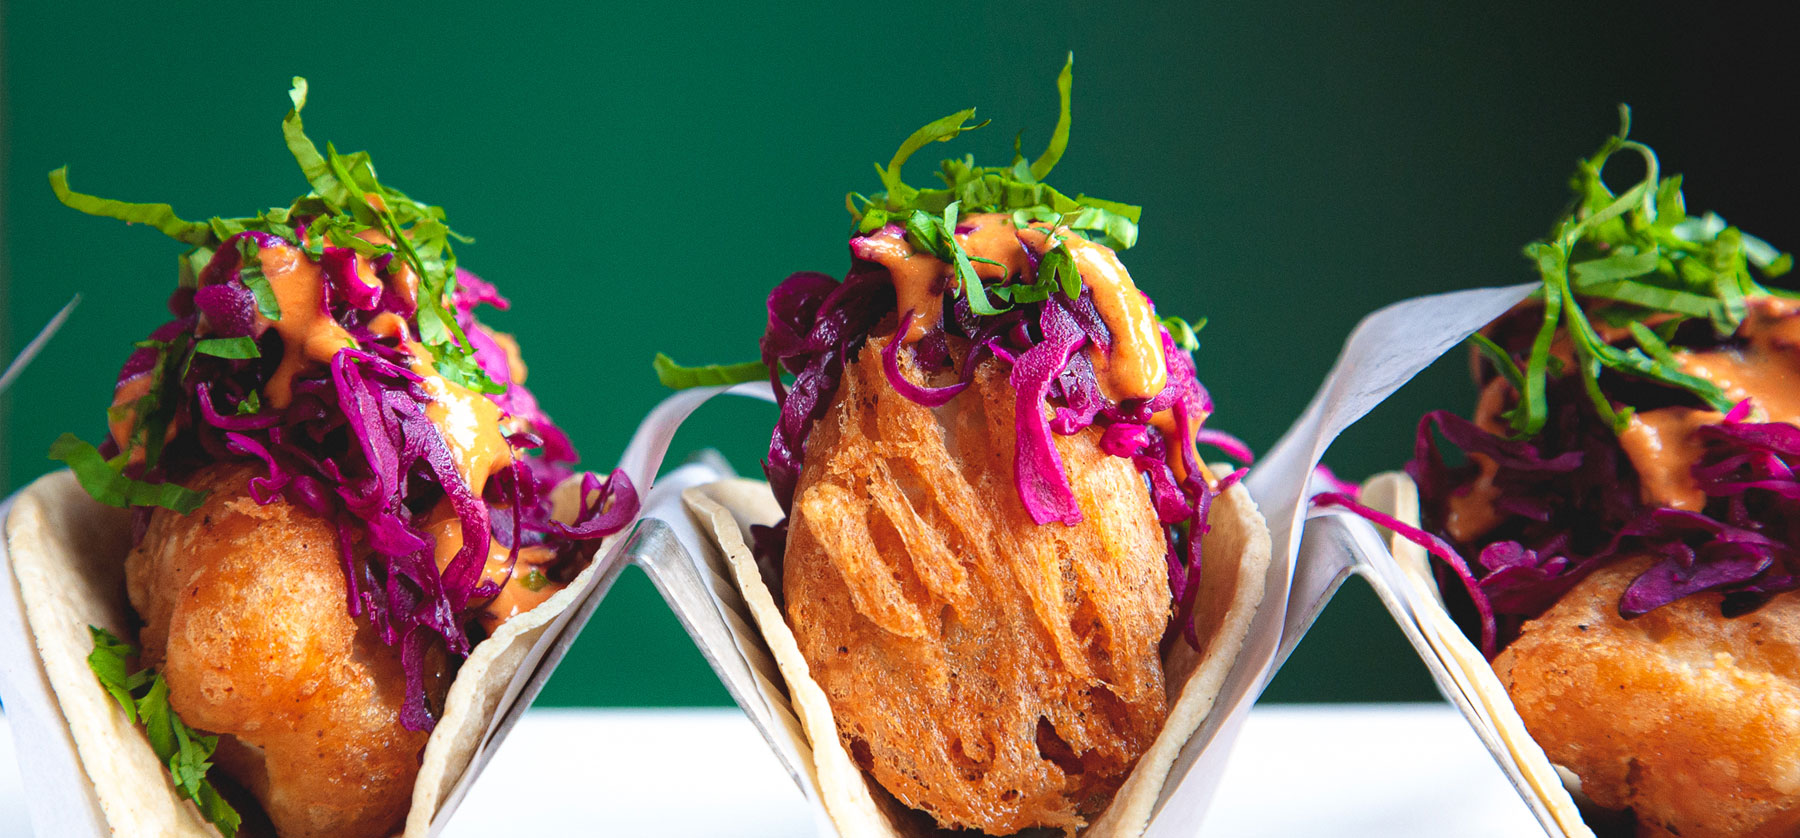 Orale | Blog | Top 5 Mexican Dishes to Try at Orale Borracho Taco